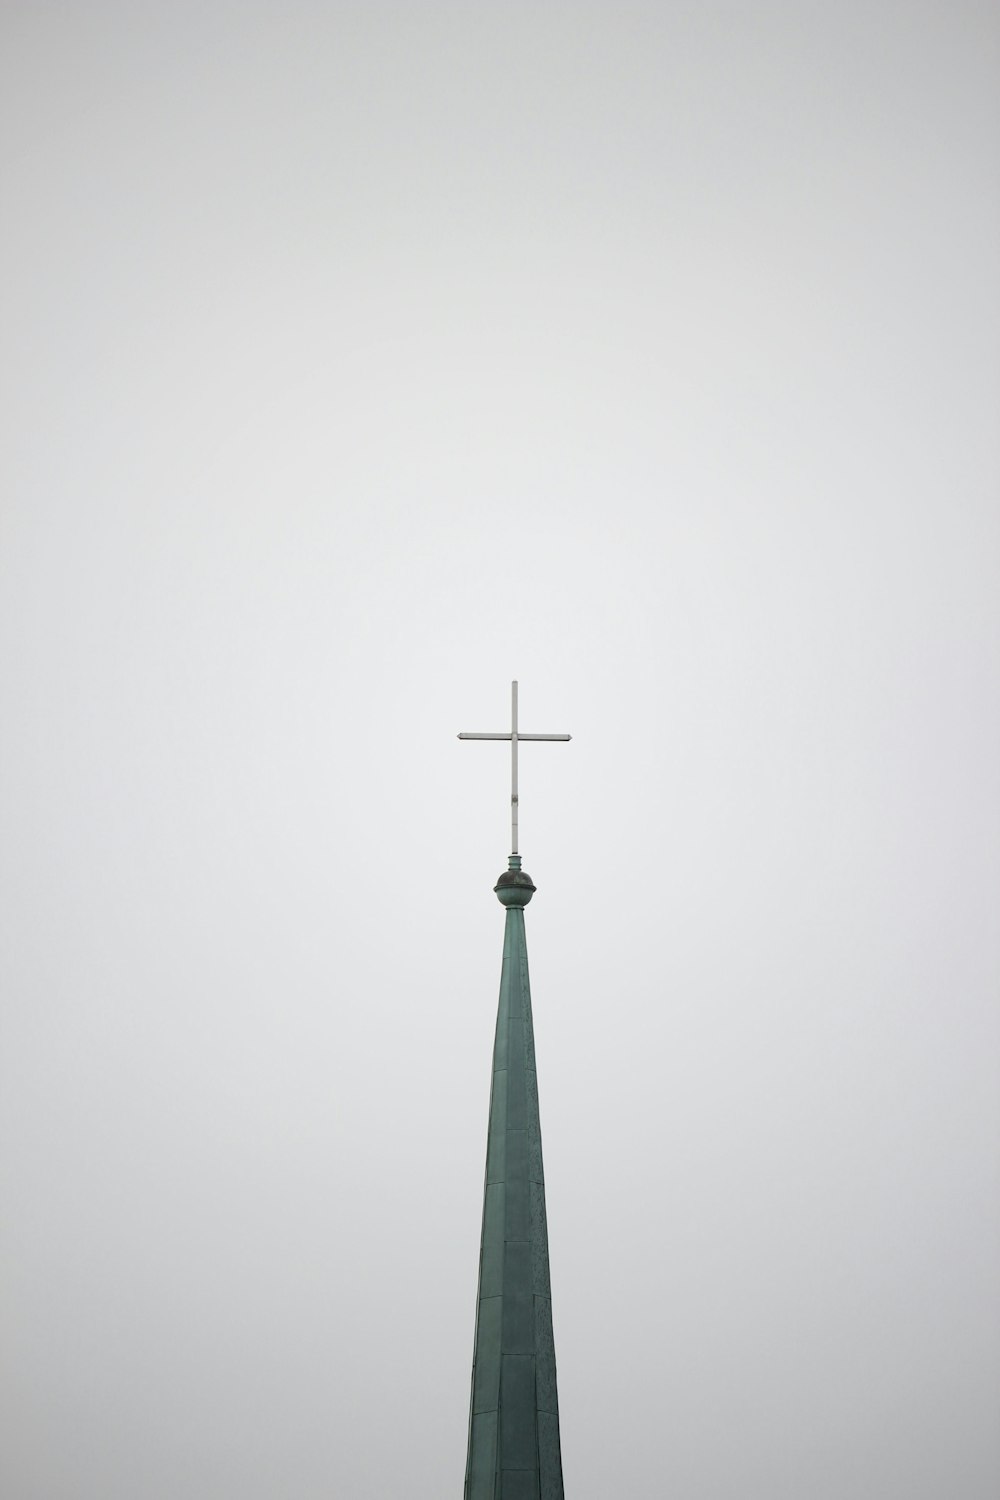 cross on top of tower